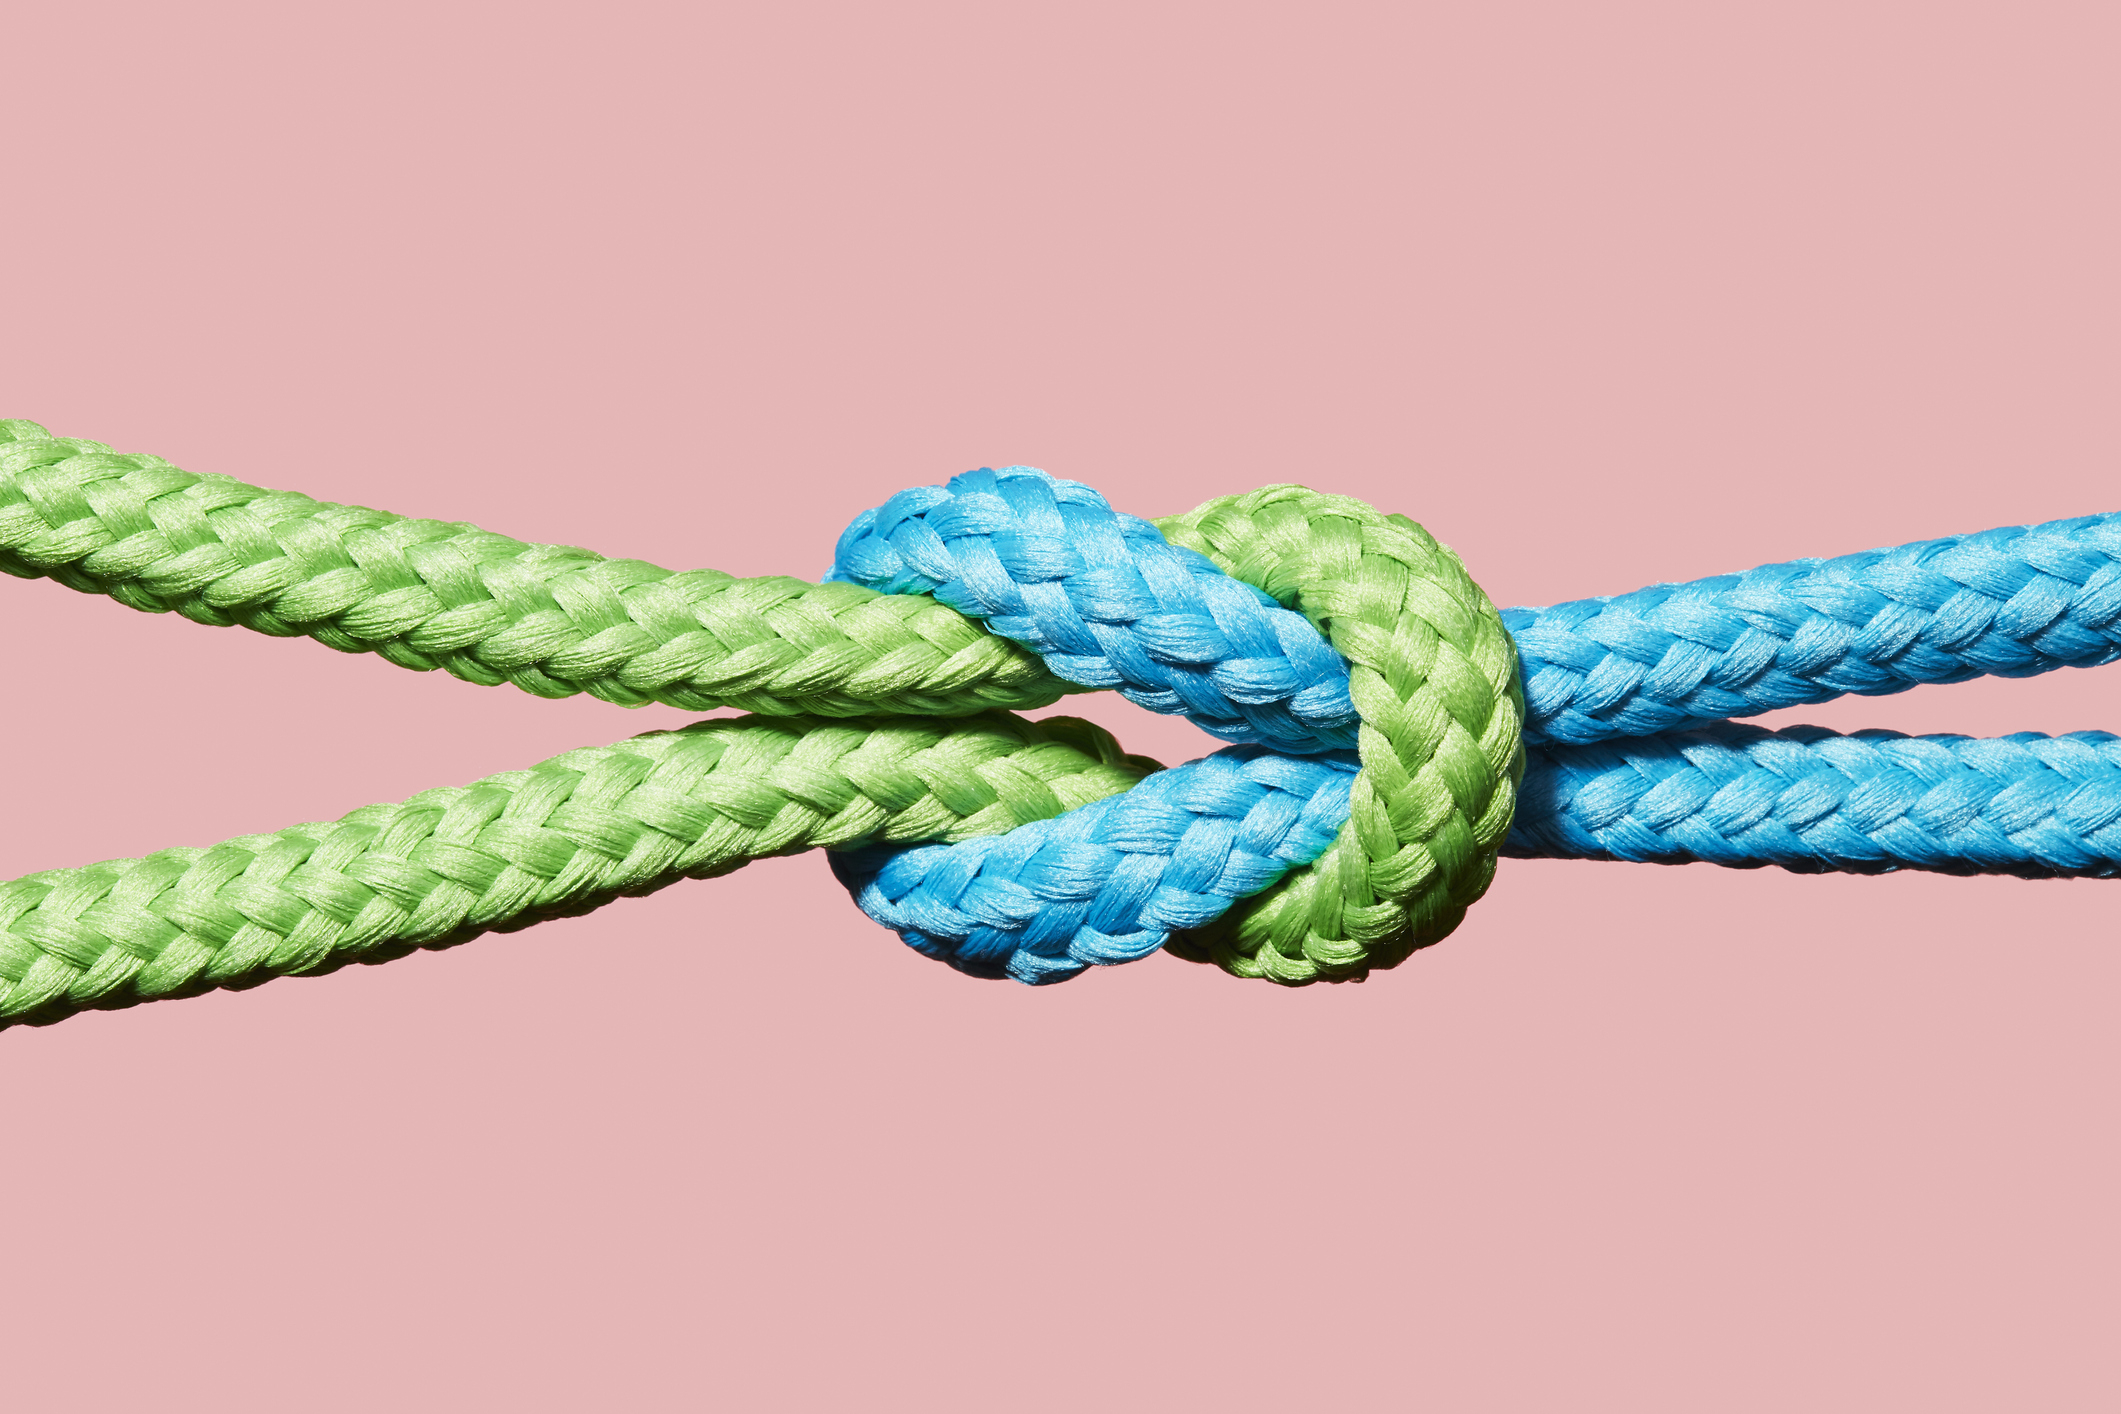 Close-up of a knot